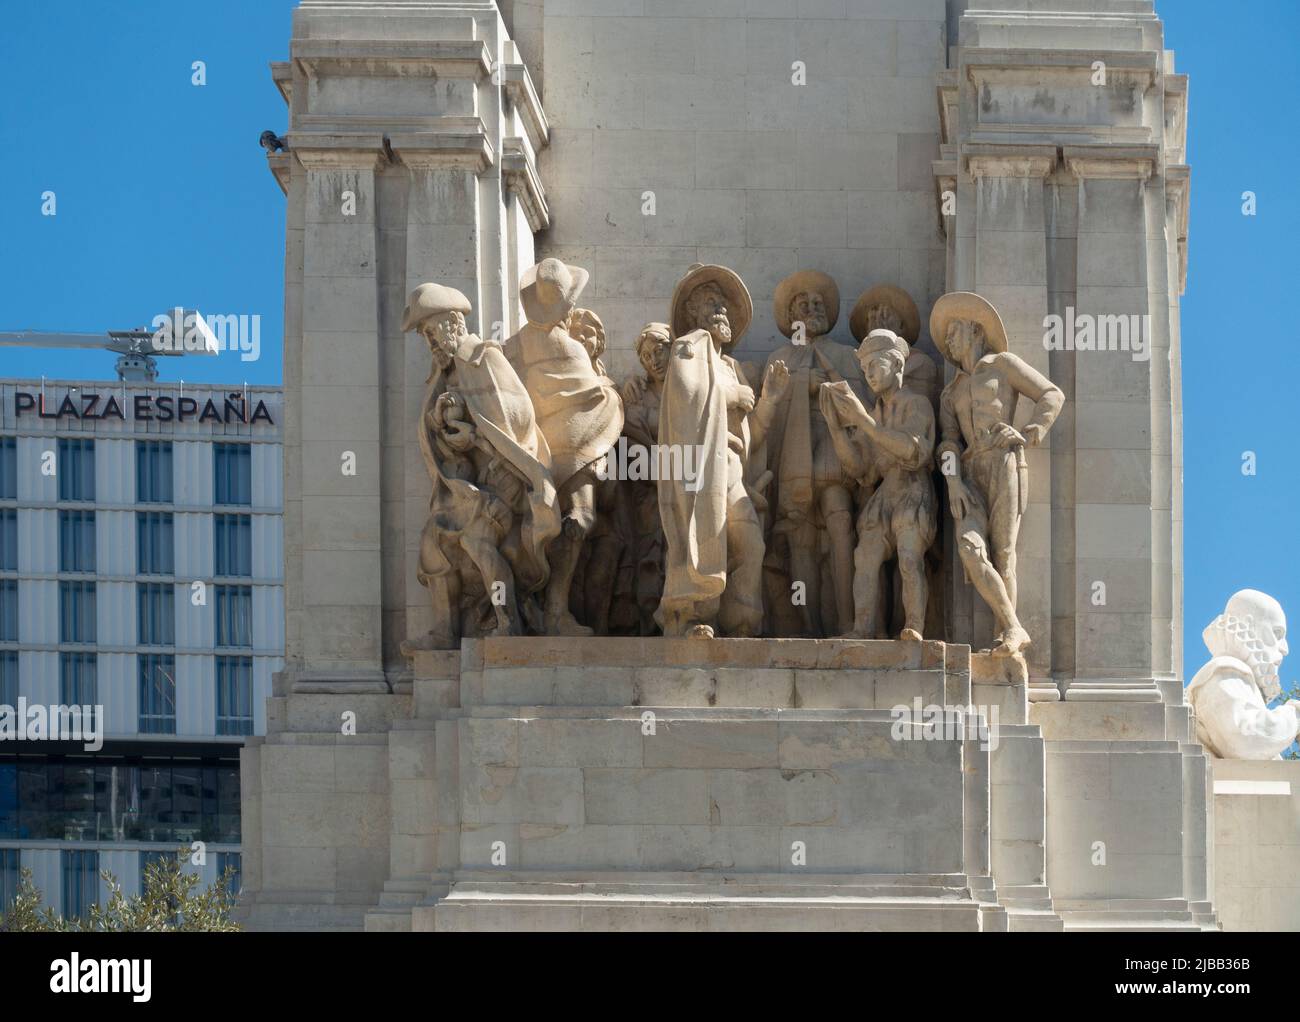 Group of statues representing Rinconete y Cortadillo, a short story by Cervantes. This group was created by Federico Coullaut-Valera Mendigutia. Stock Photo